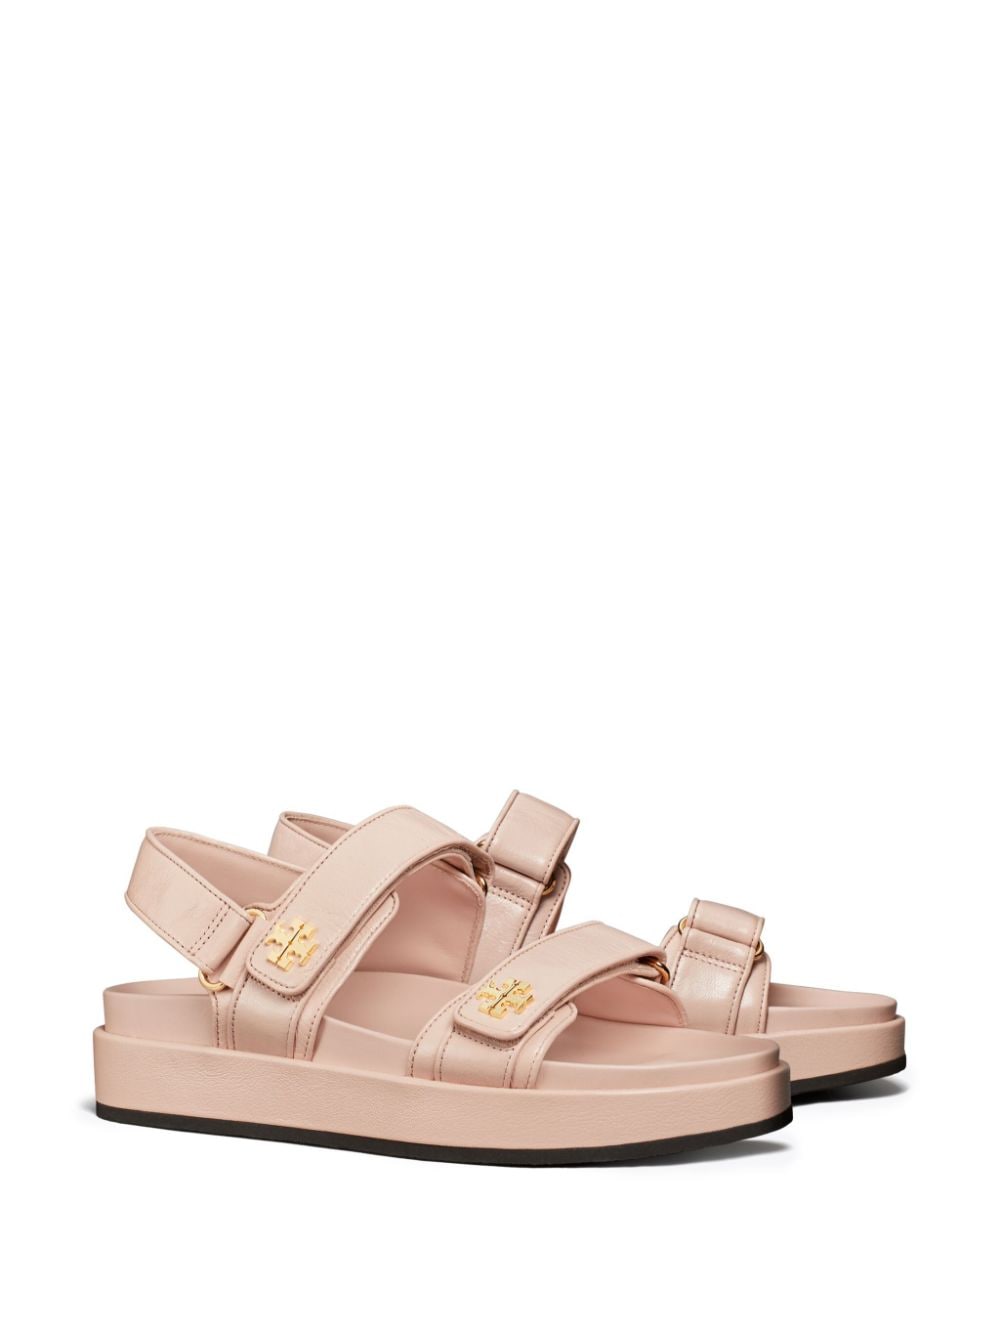 Tory Burch TORY BURCH- Ines Leather Sandals